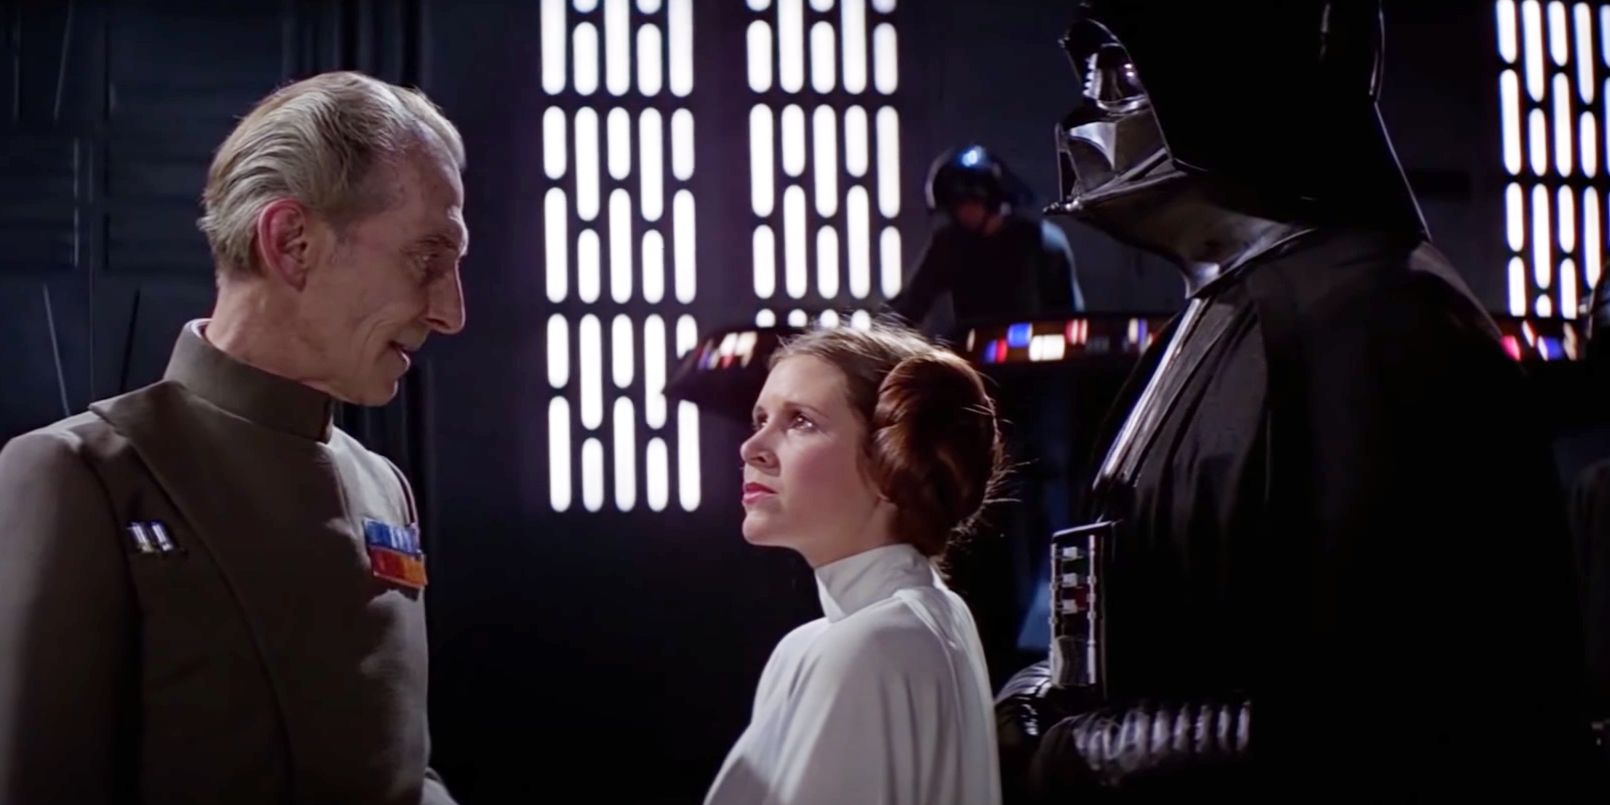 Leia in between Darth Vader and Grand Moff Tarkin in A New Hope